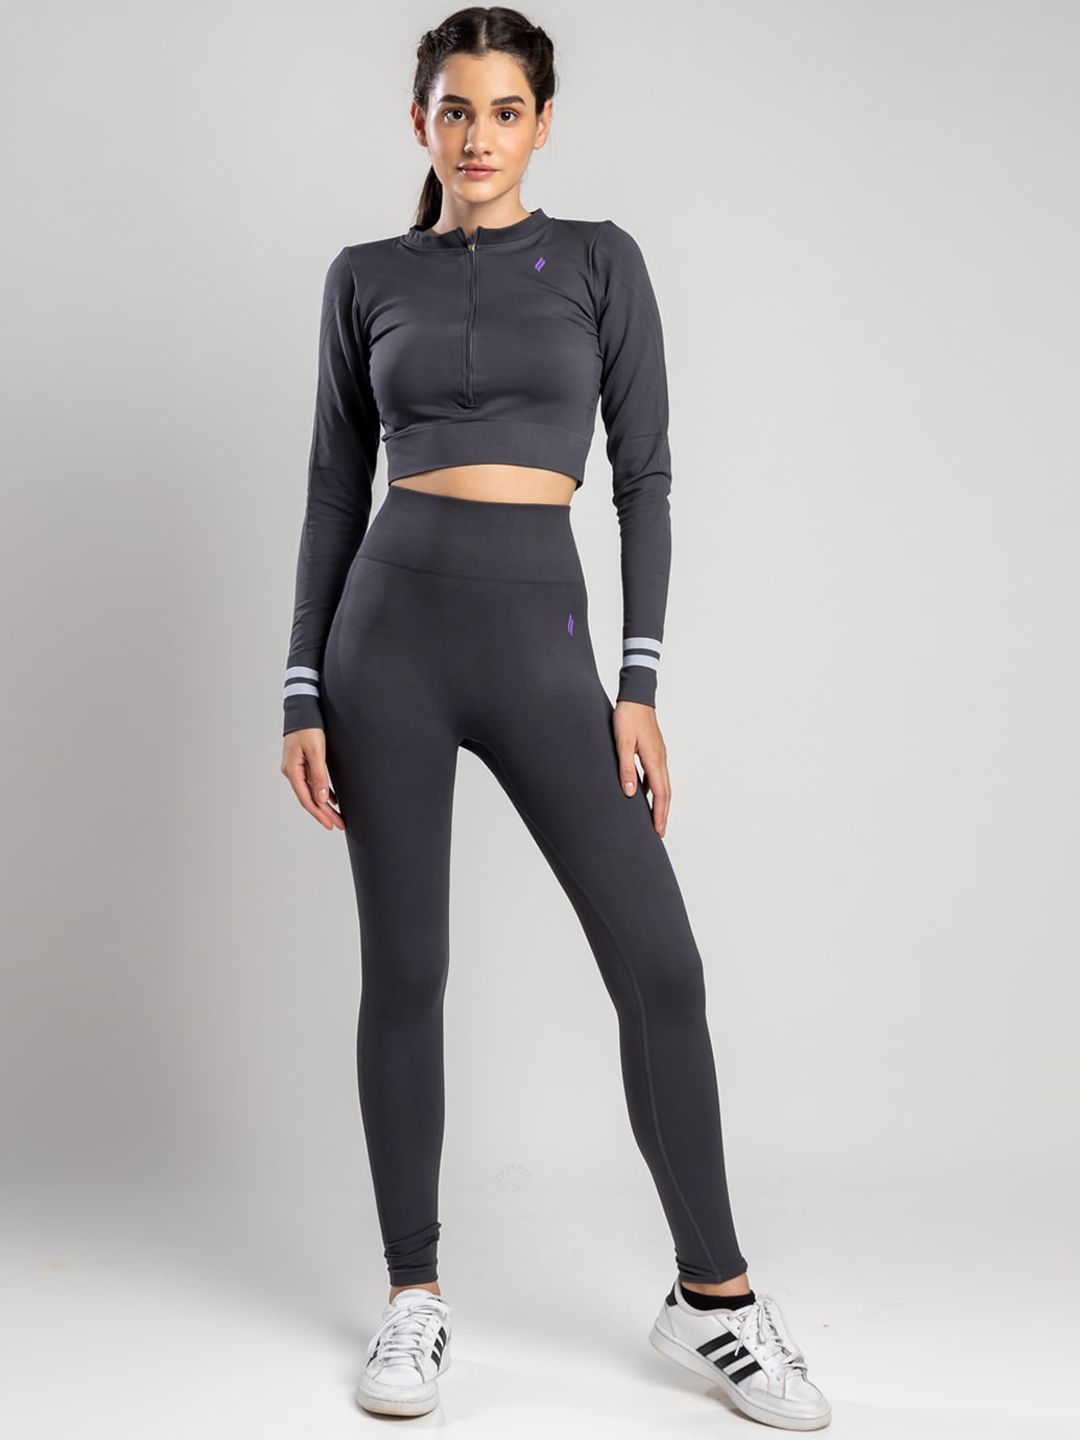 SKNZ Women Black Solid Tracksuit Price in India